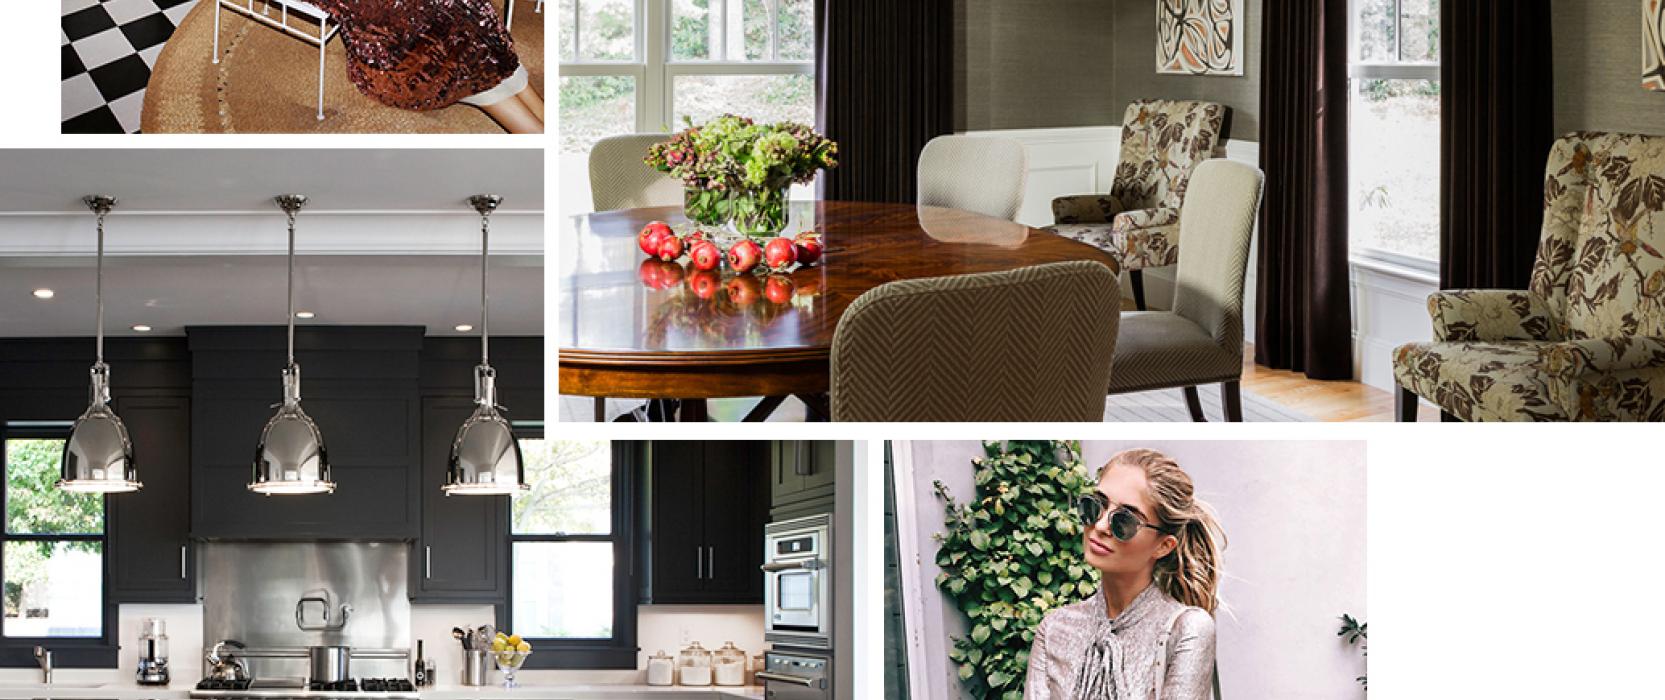 High Fashion Looks for the Residential Home